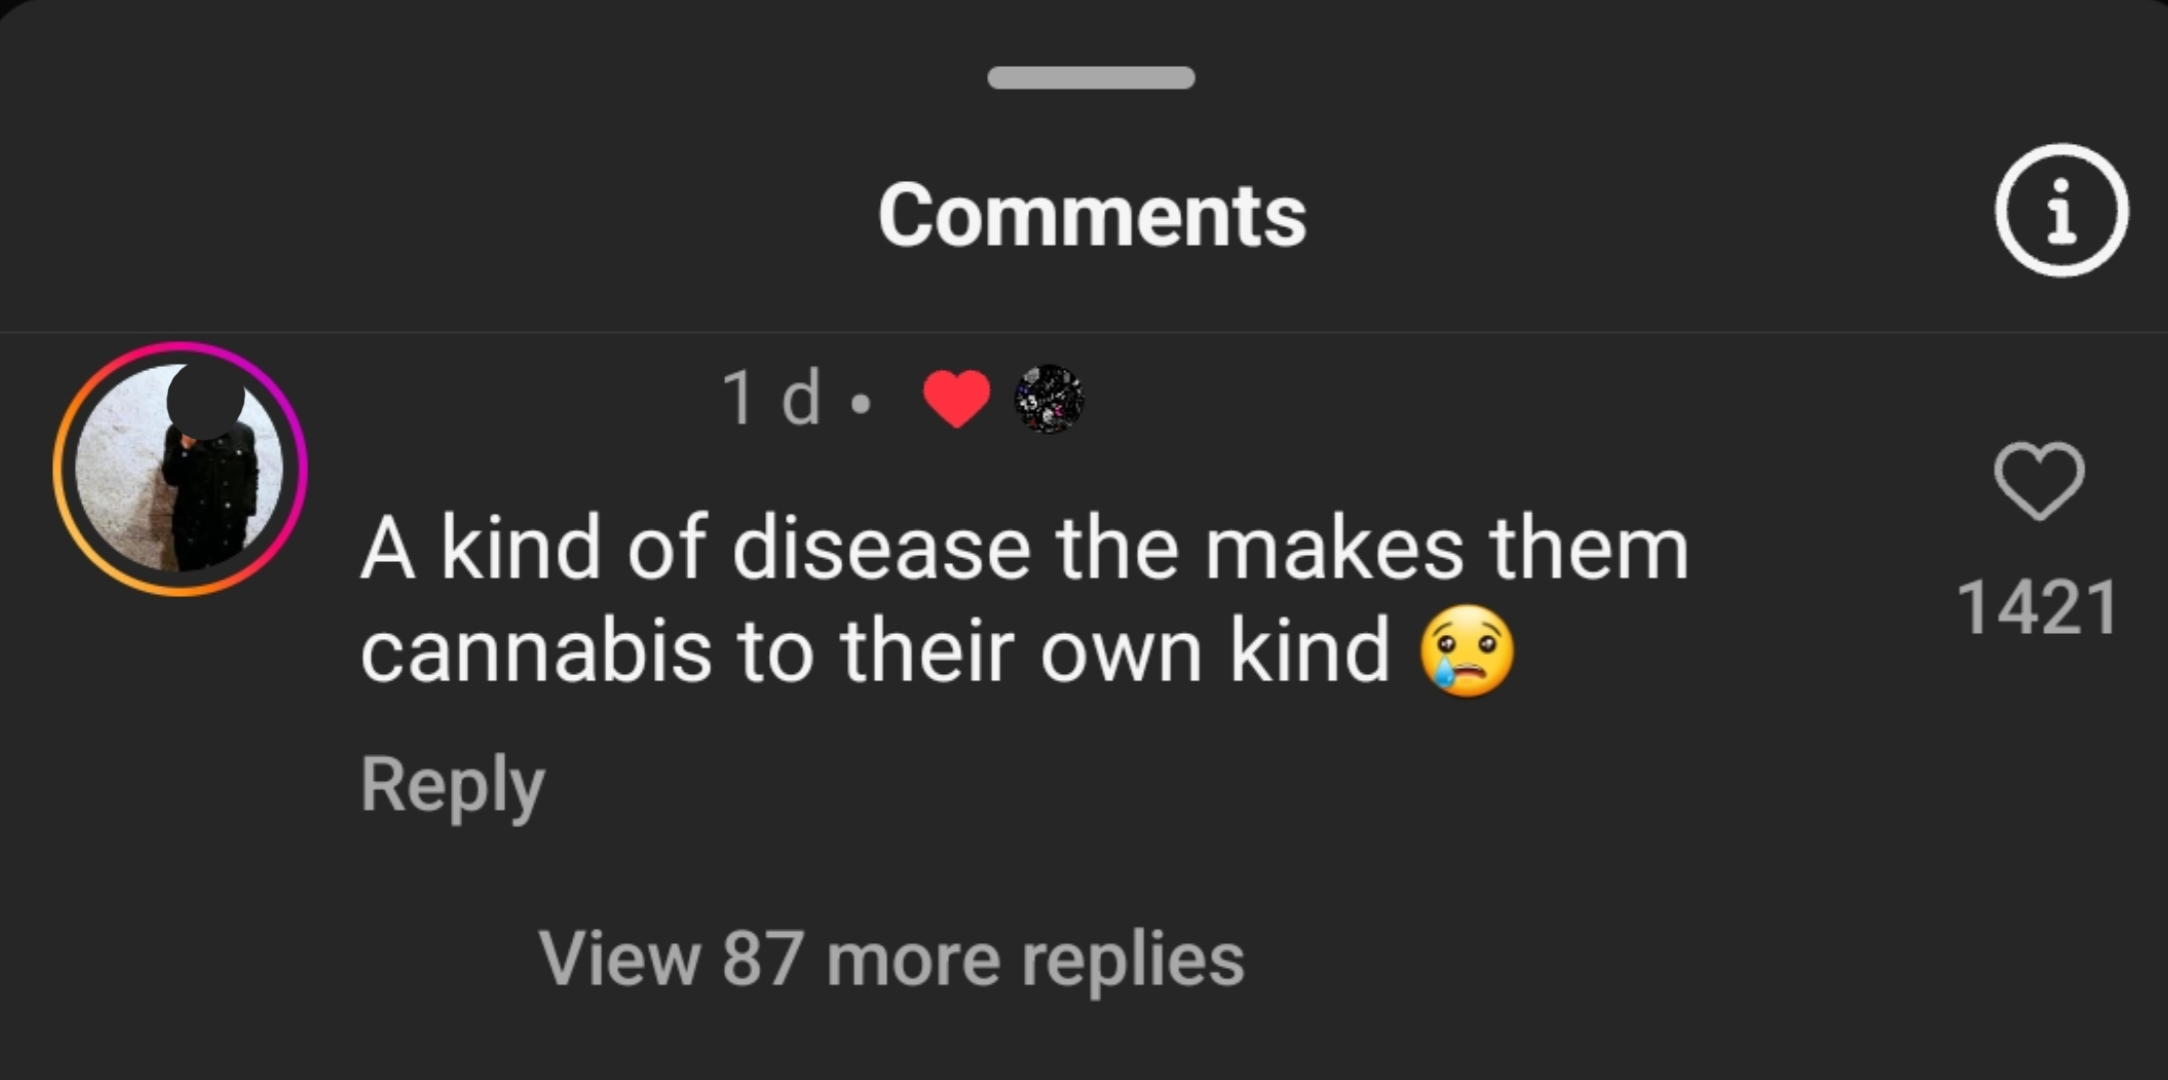 A social media comment saying, &quot;A kind of disease that makes them cannabis to their own kind,&quot; with a sad face emoji. The comment has 1,421 likes